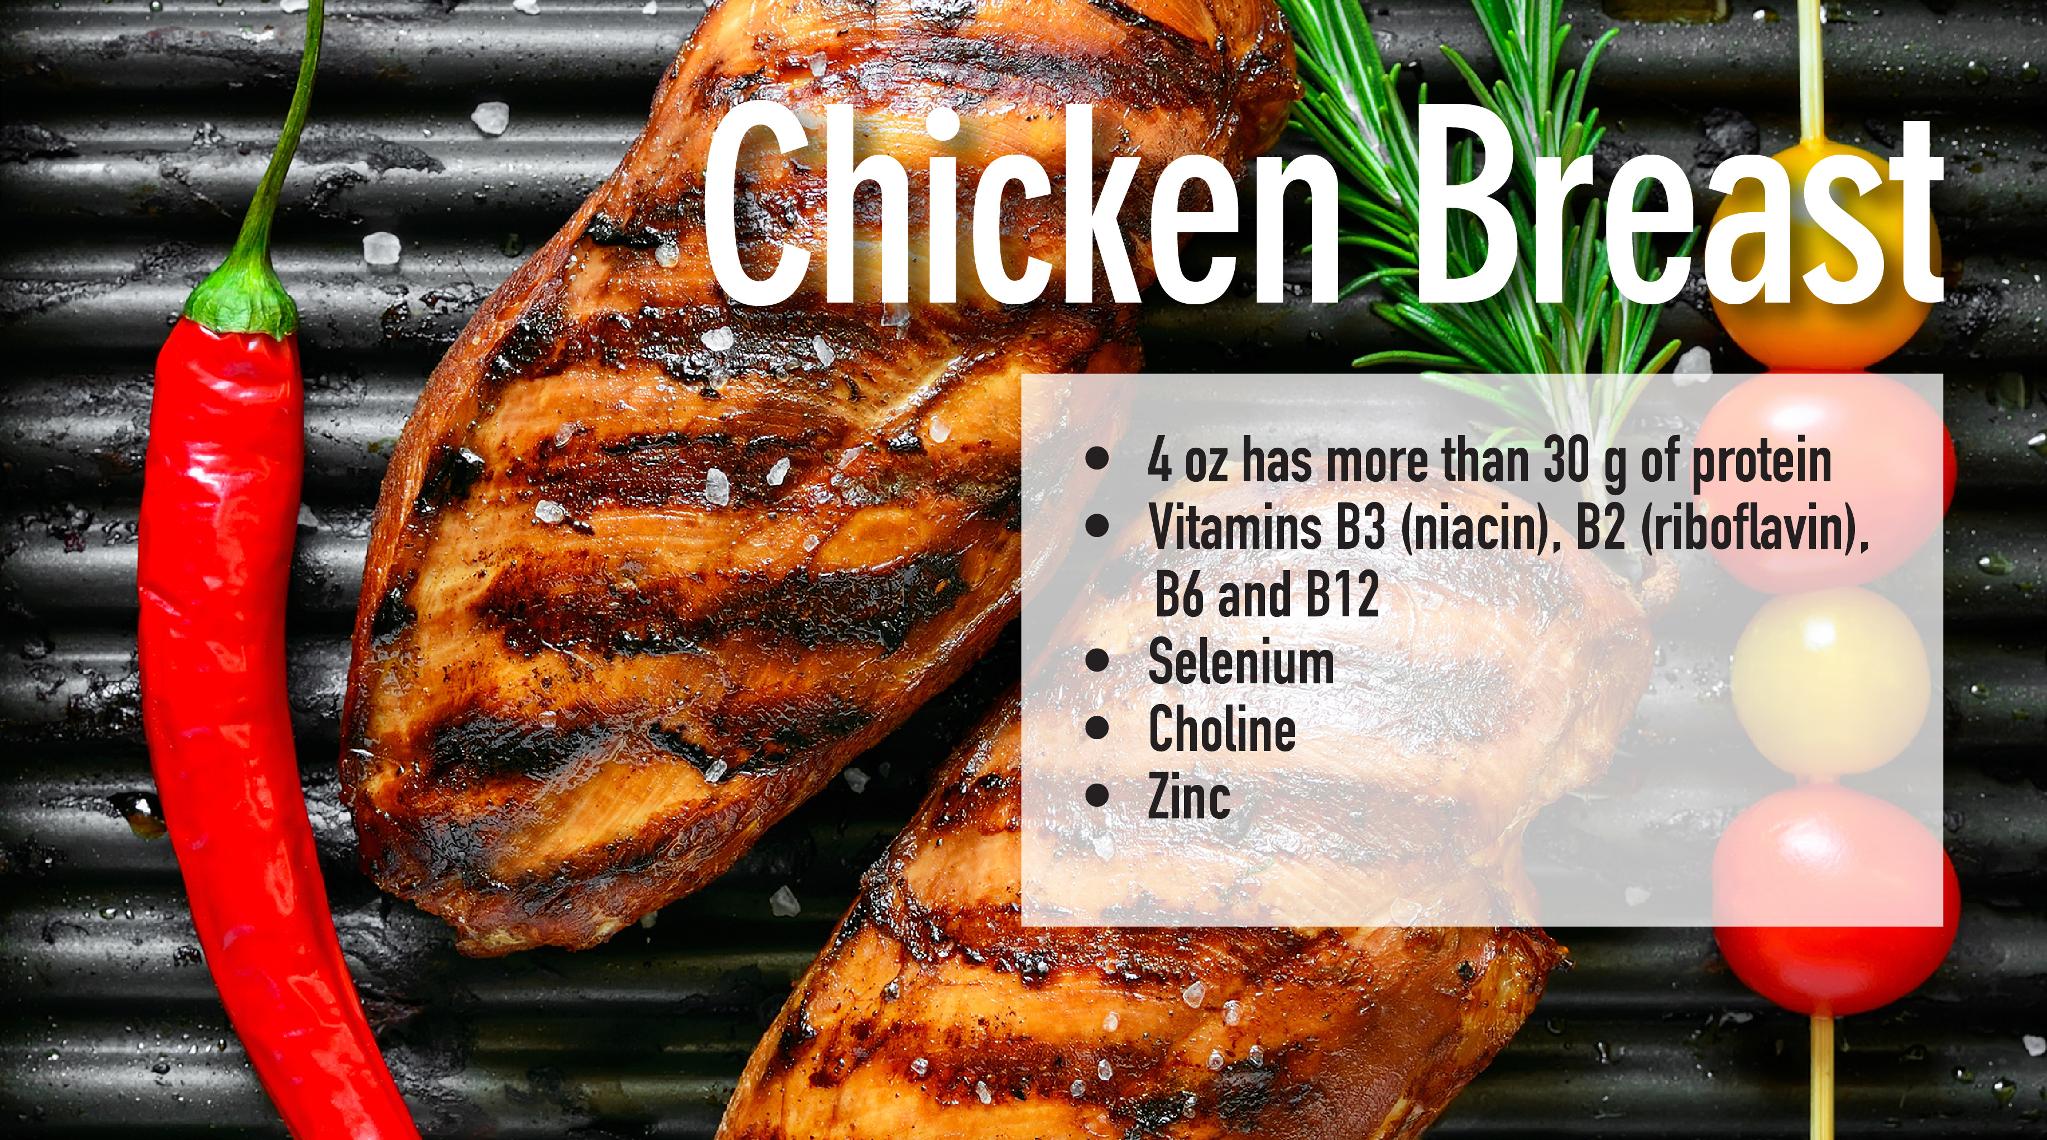 Herbalife24 on Twitter: "4 oz of chicken breast has more ...